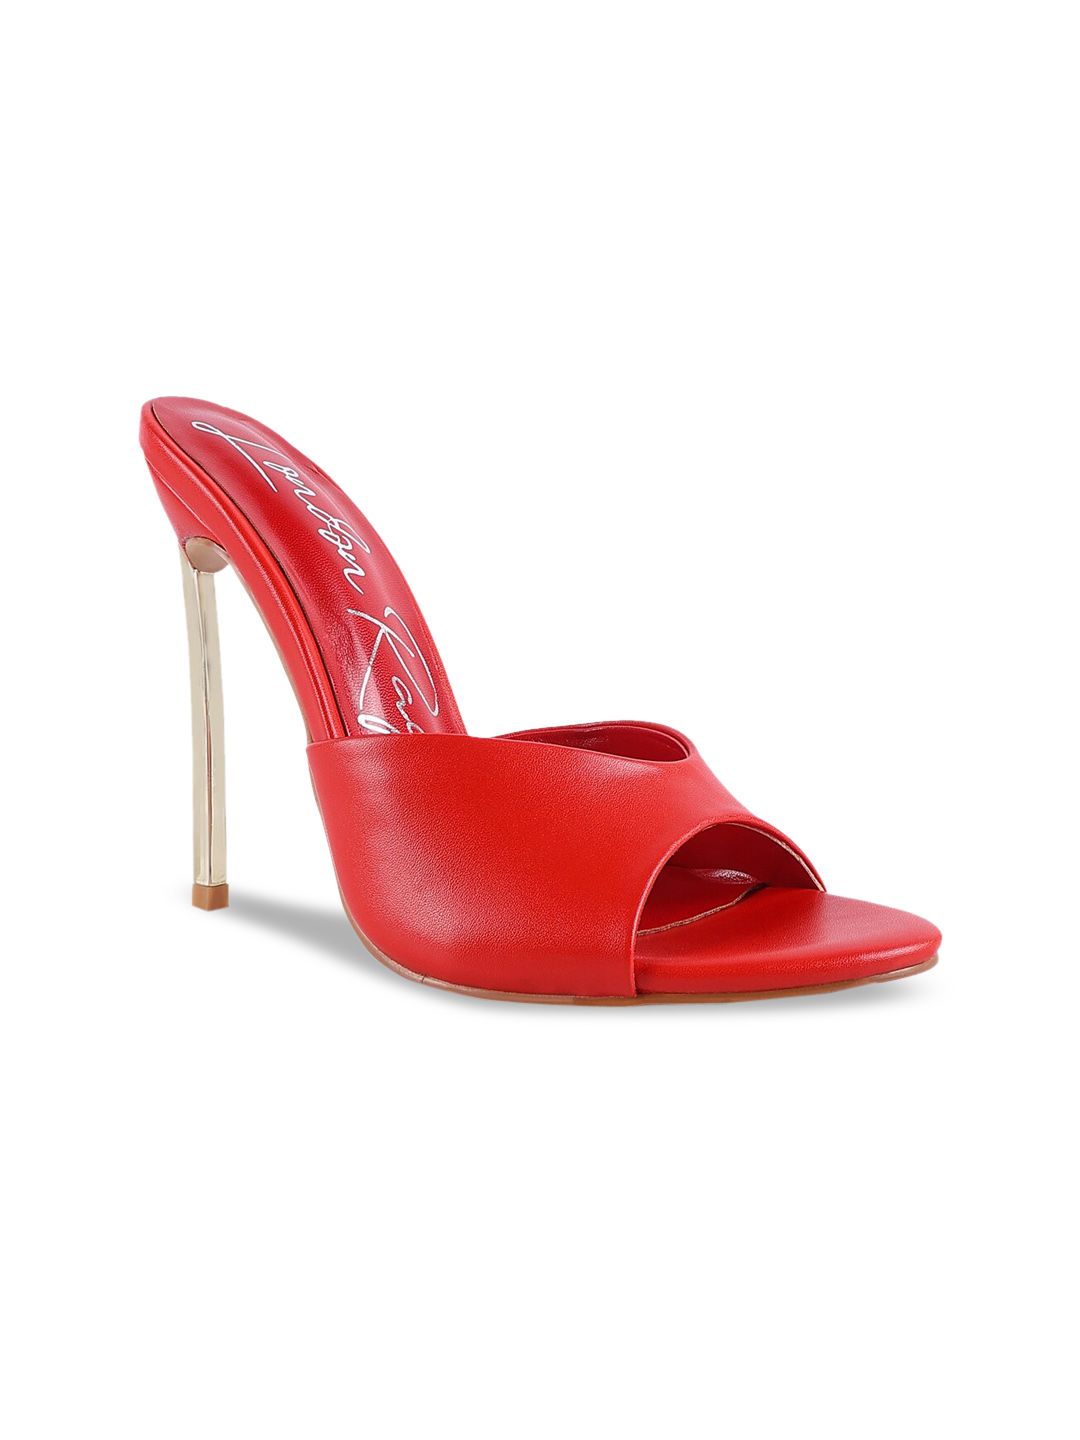 London Rag Red PU Party Stiletto Peep Toes Price in India